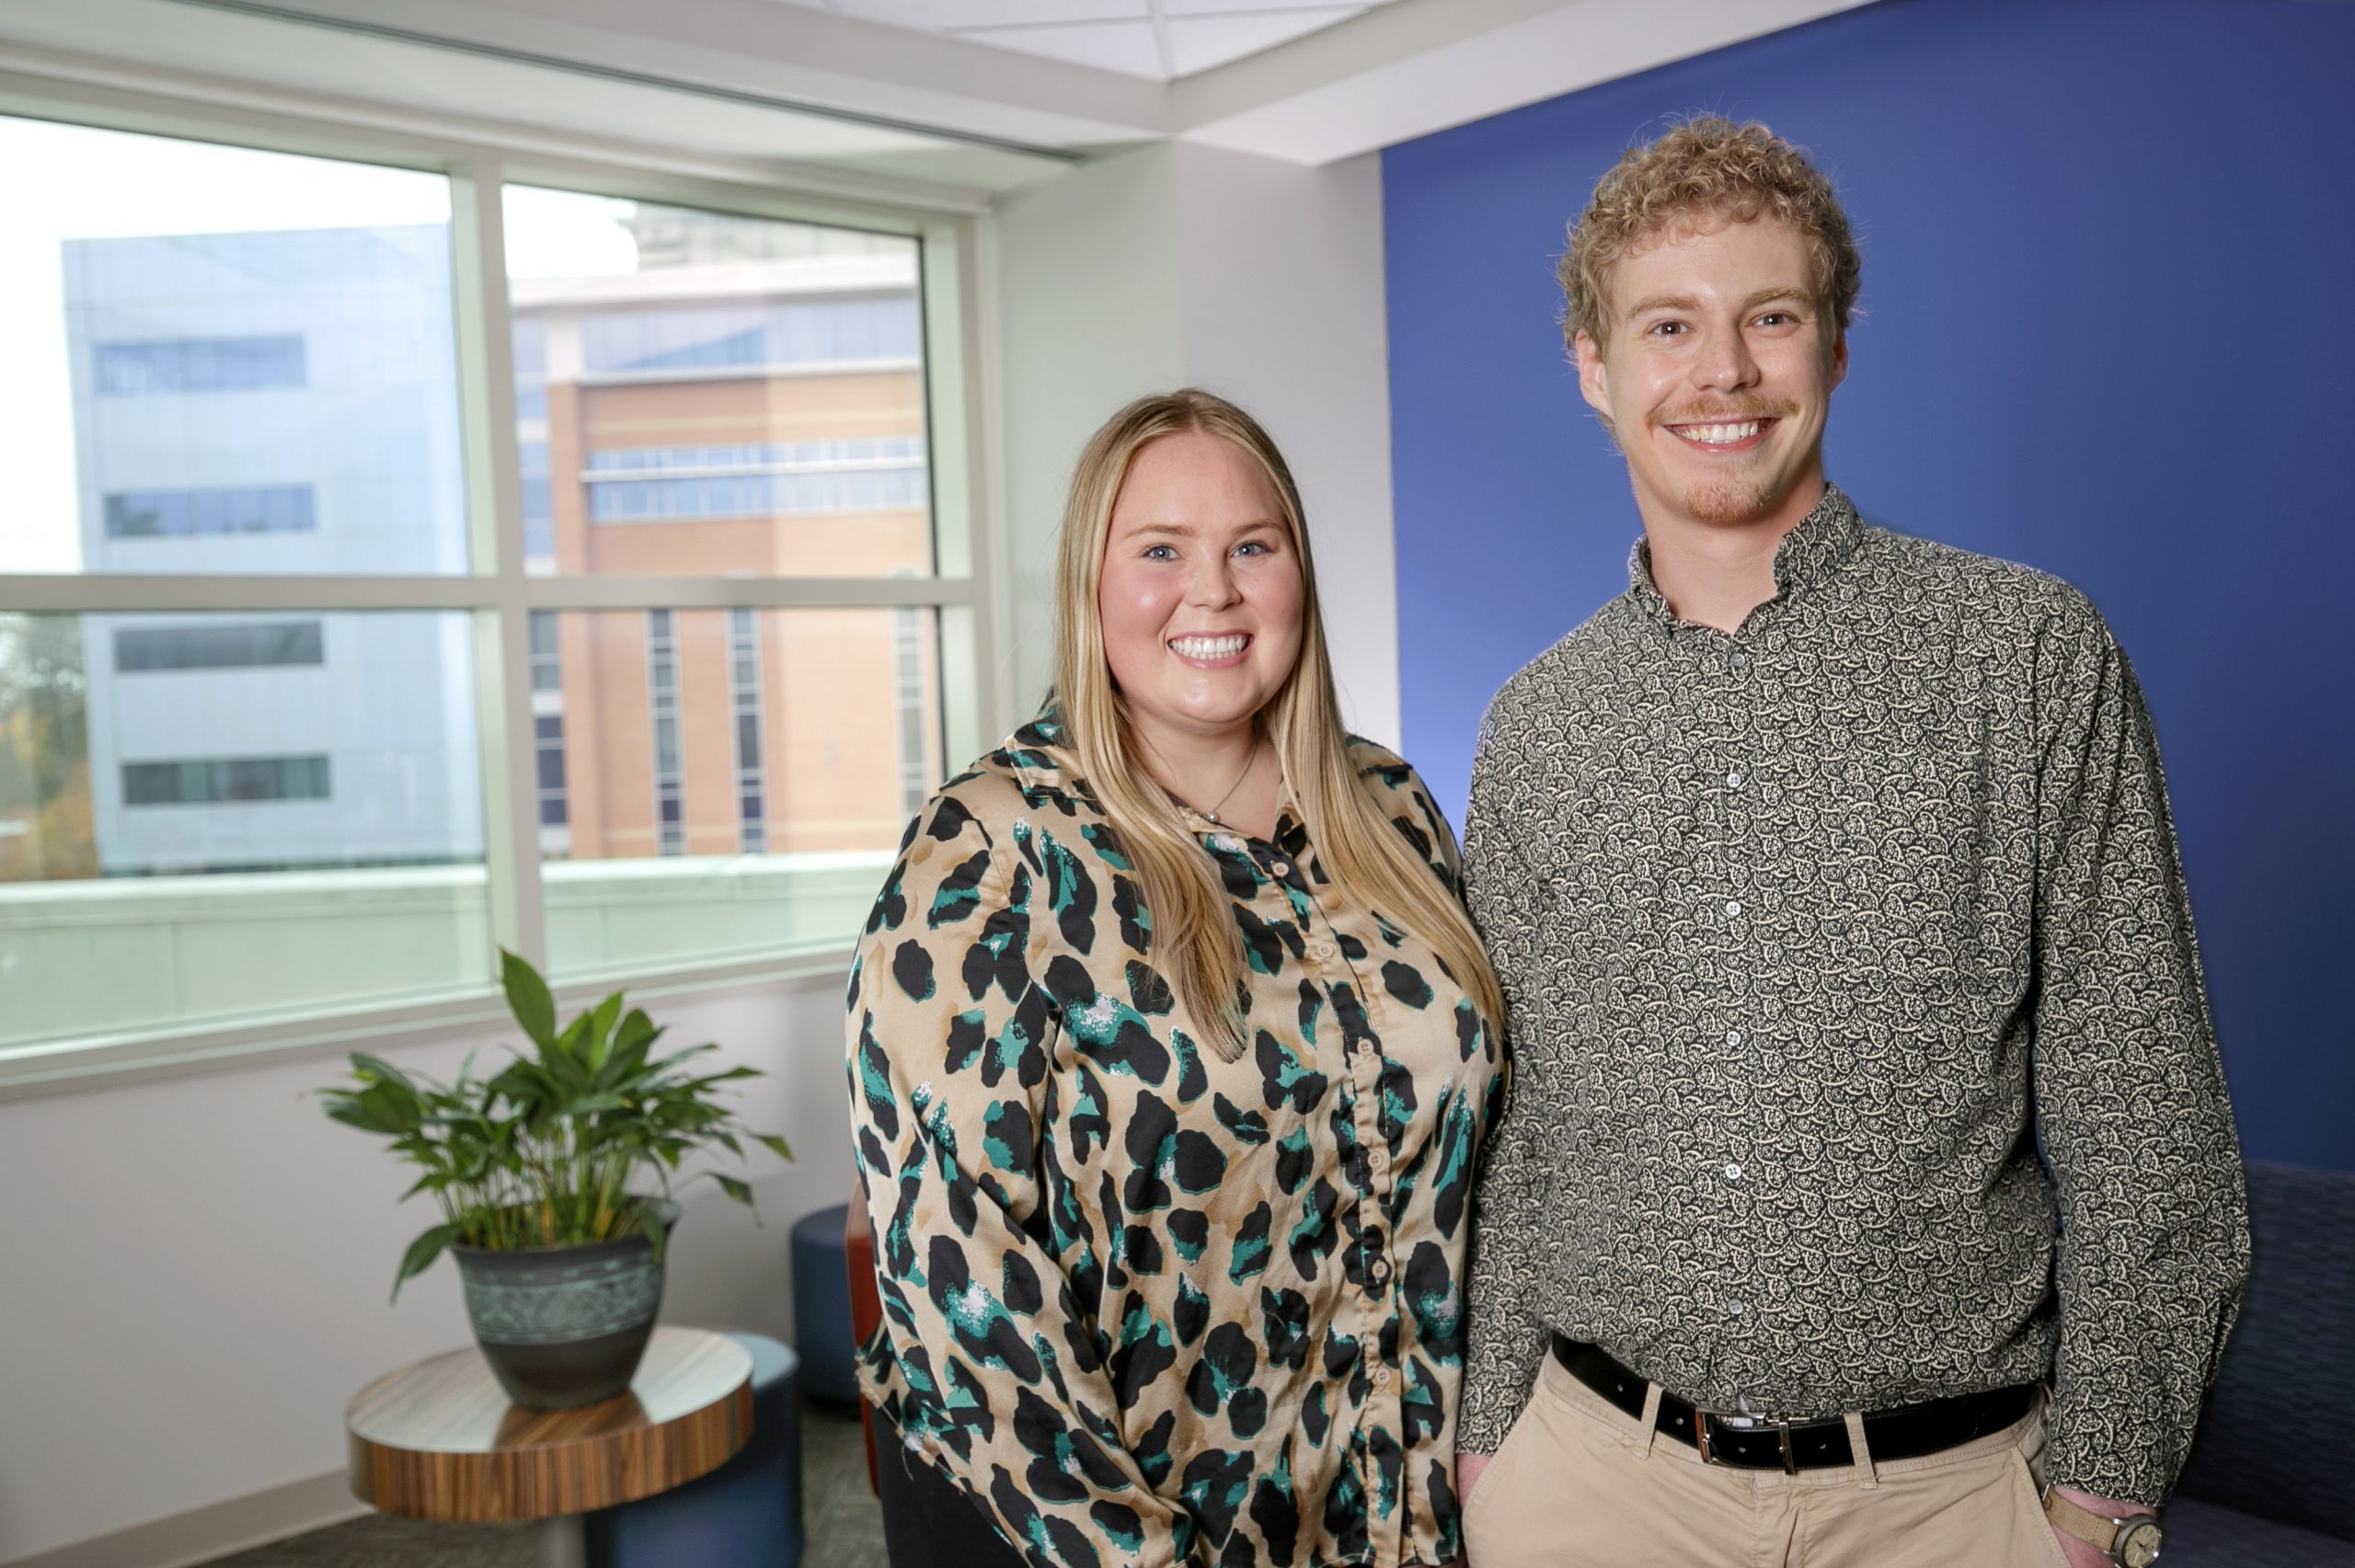 Elizabeth and Josiah are graduate students who work on the Startup Team at UA Little Rock's Arkansas Small Business and Technology Department Center.